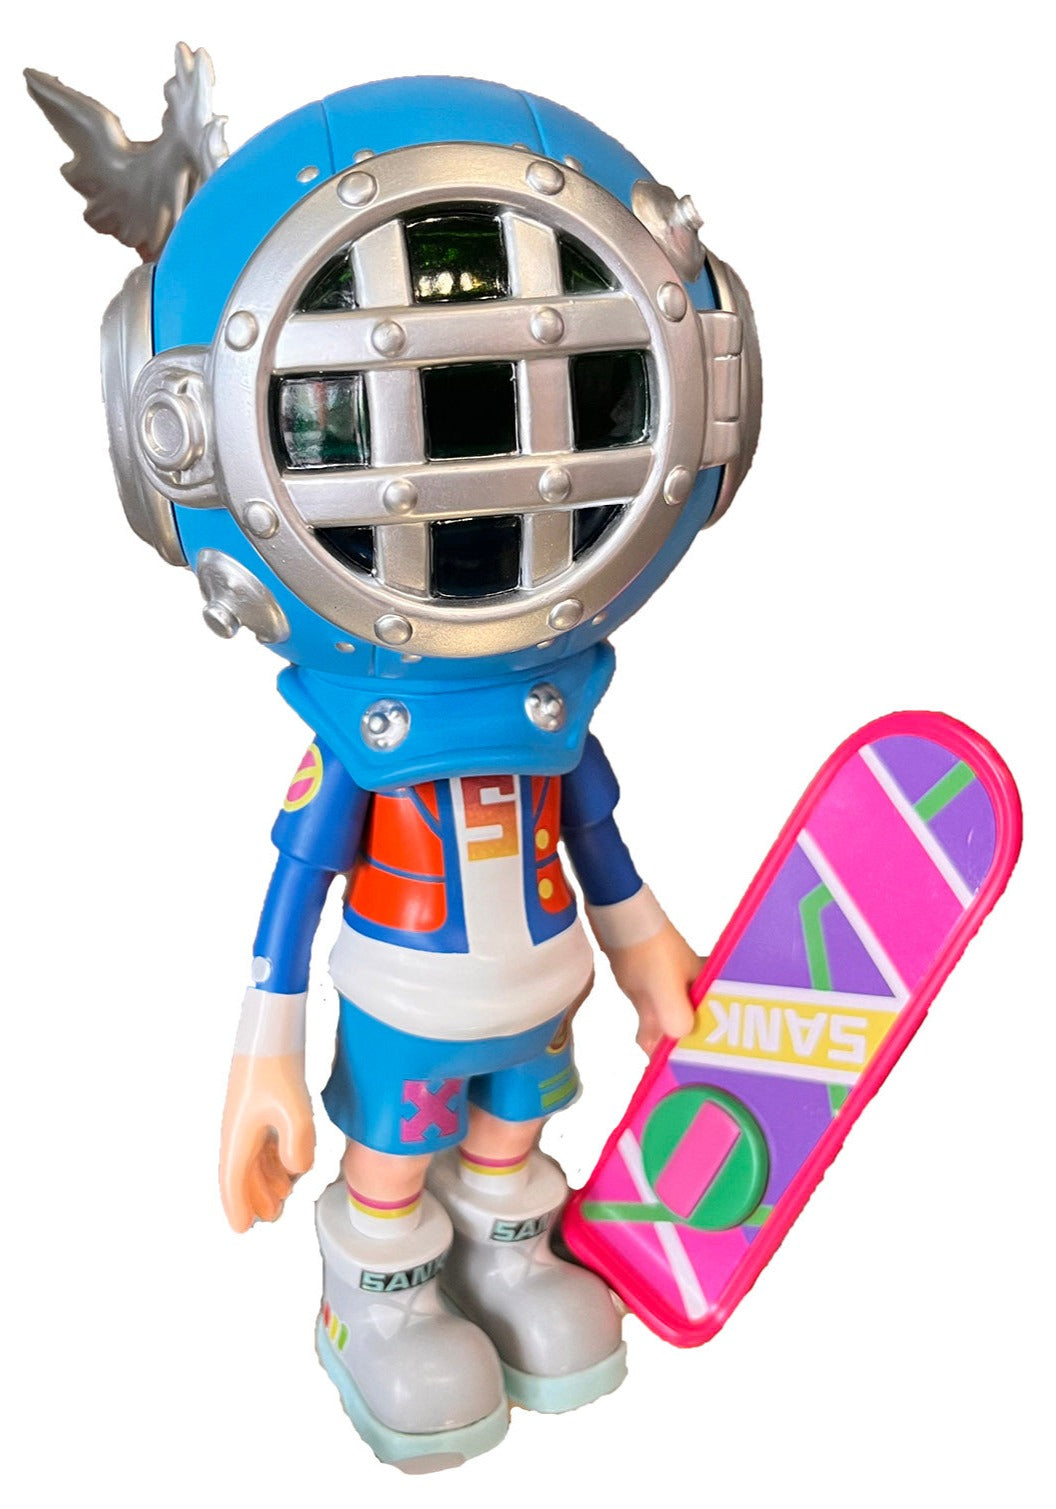 Sank Toys On the Way Skater Boy Back to the Future Figure